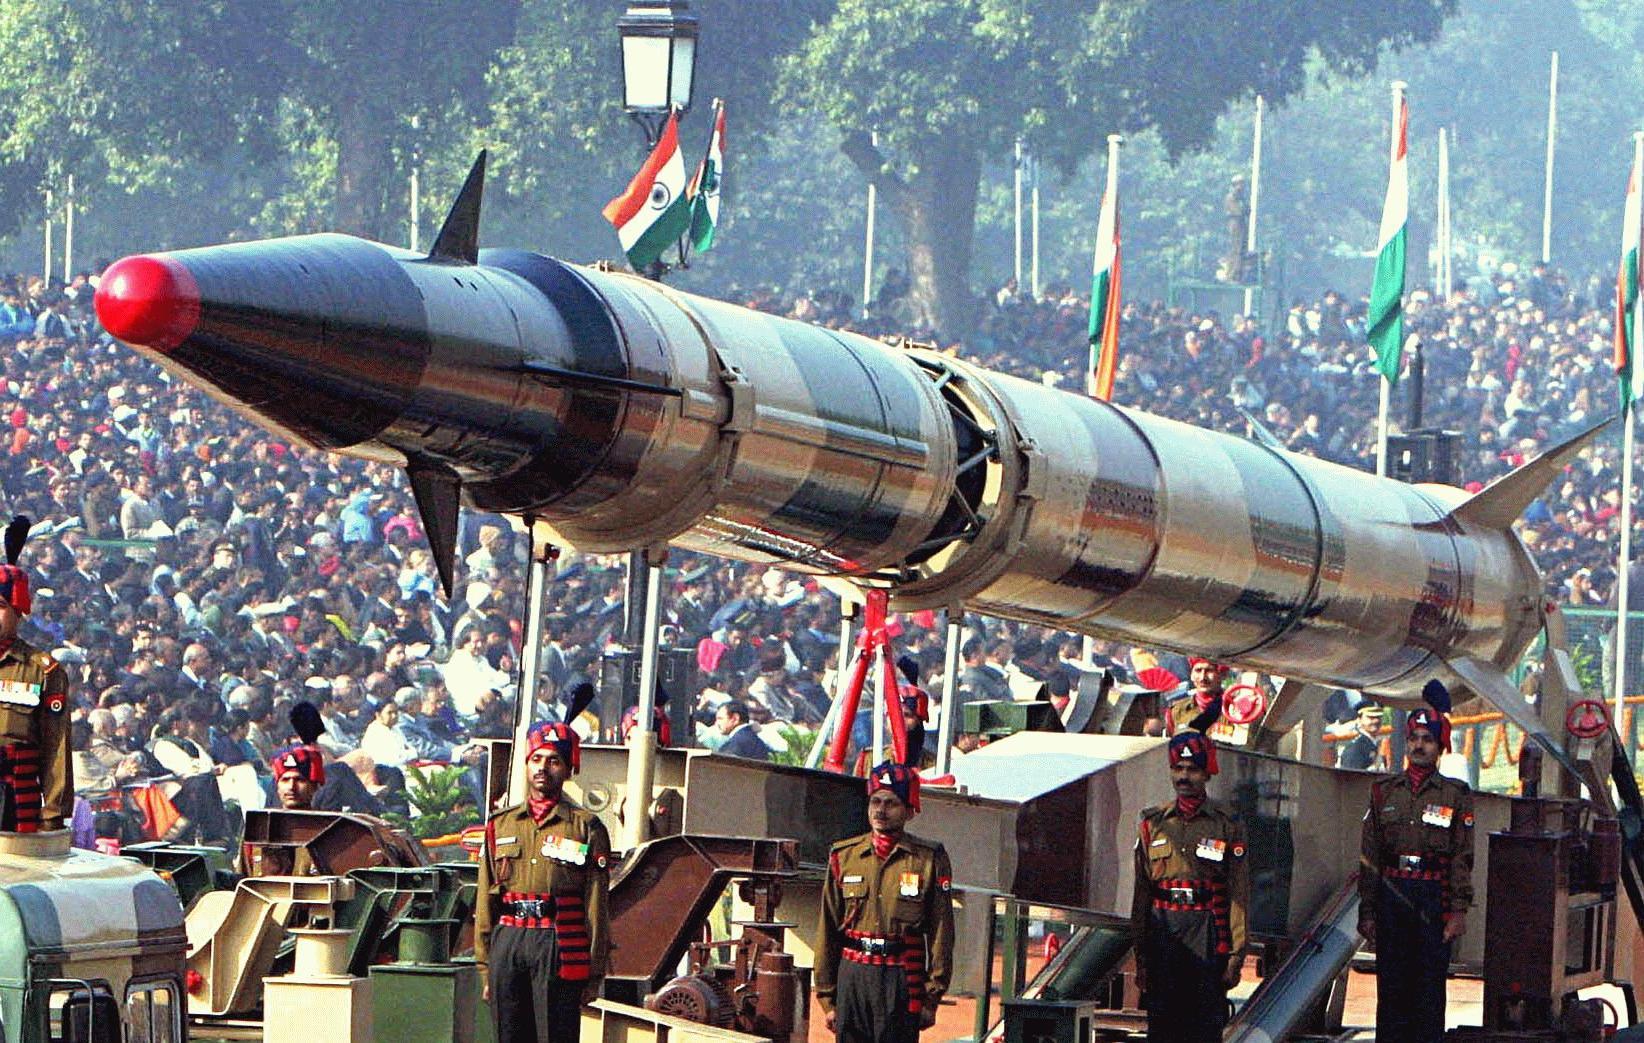 Agni missile, difference between ballistic and cruise missile